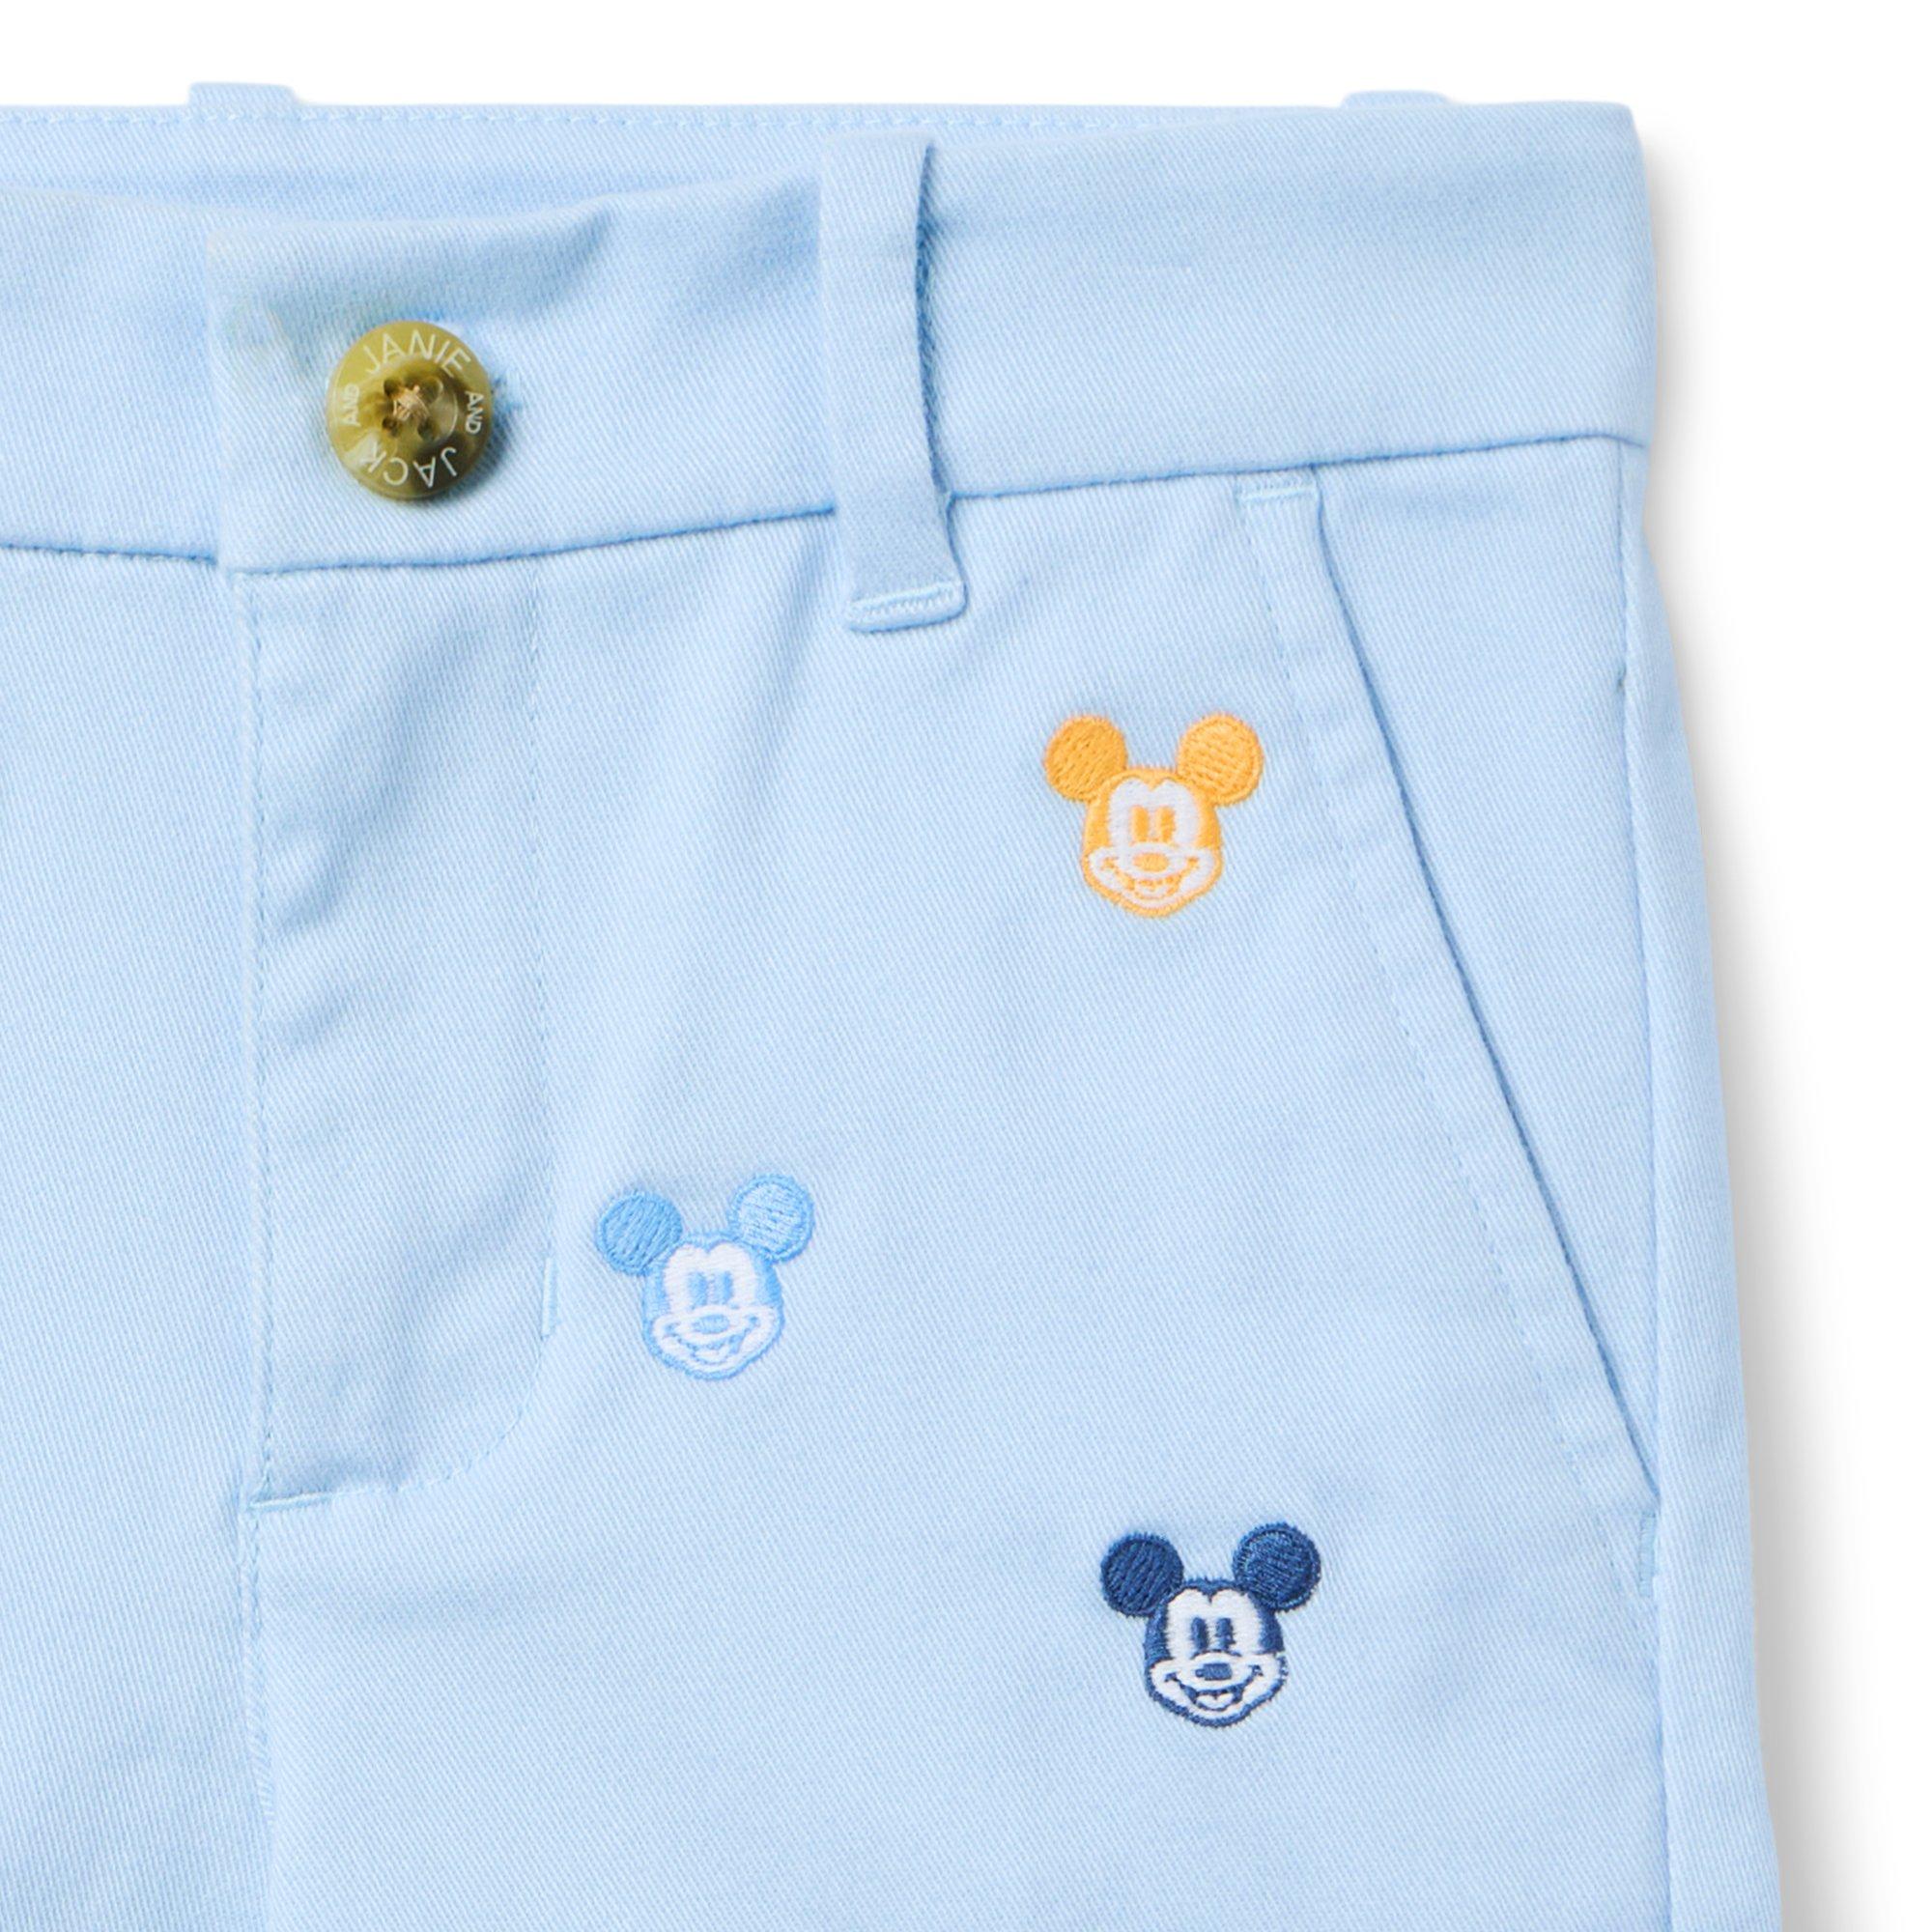 Disney Mickey Mouse Embroidered Twill Short image number 1